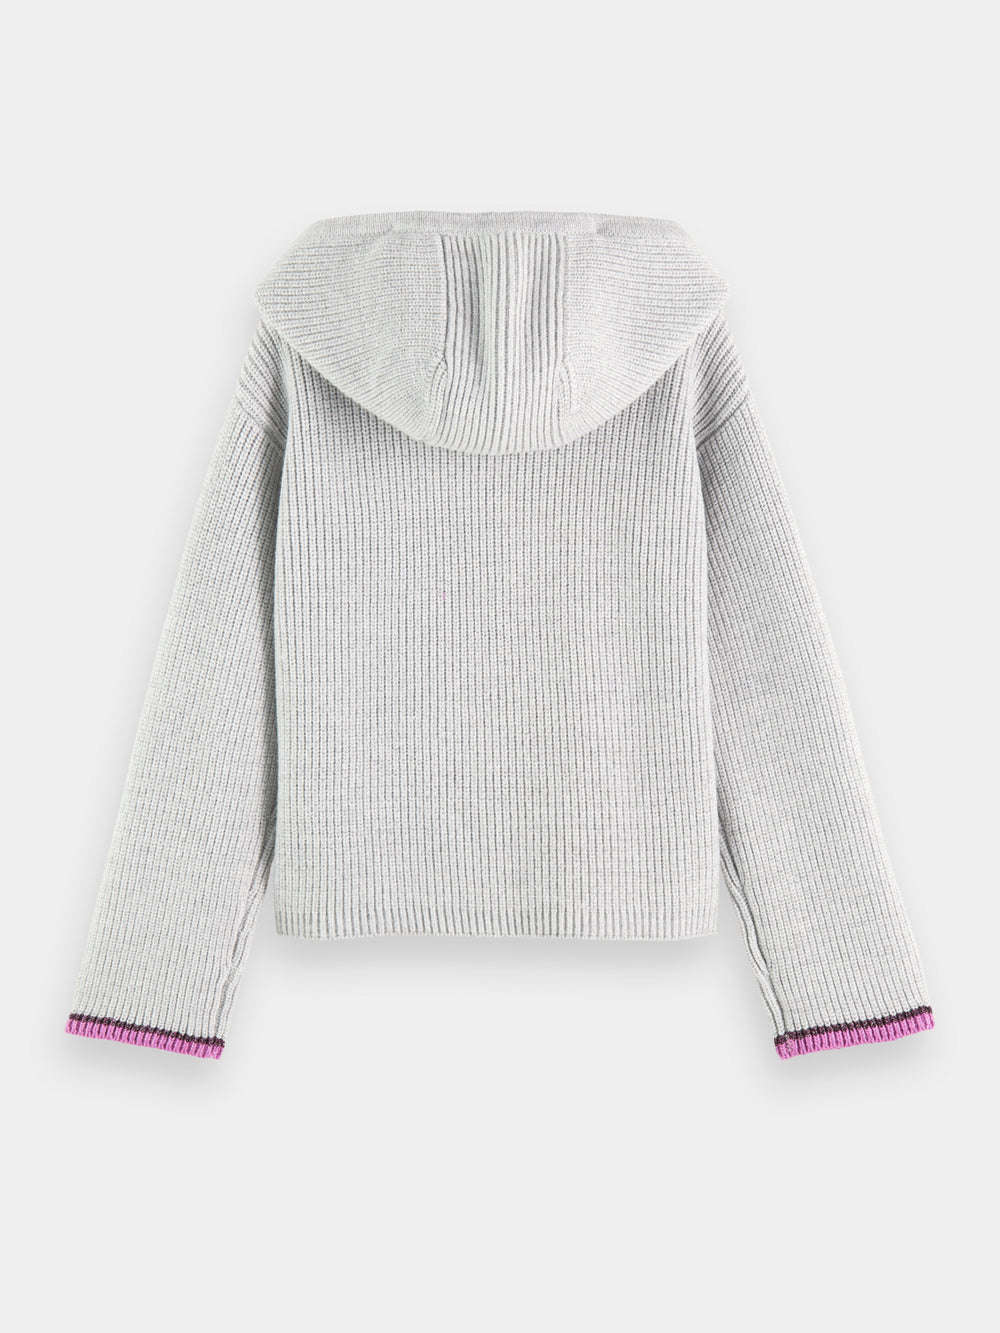 Kids - Hooded tipping detail pullover - Scotch & Soda AU